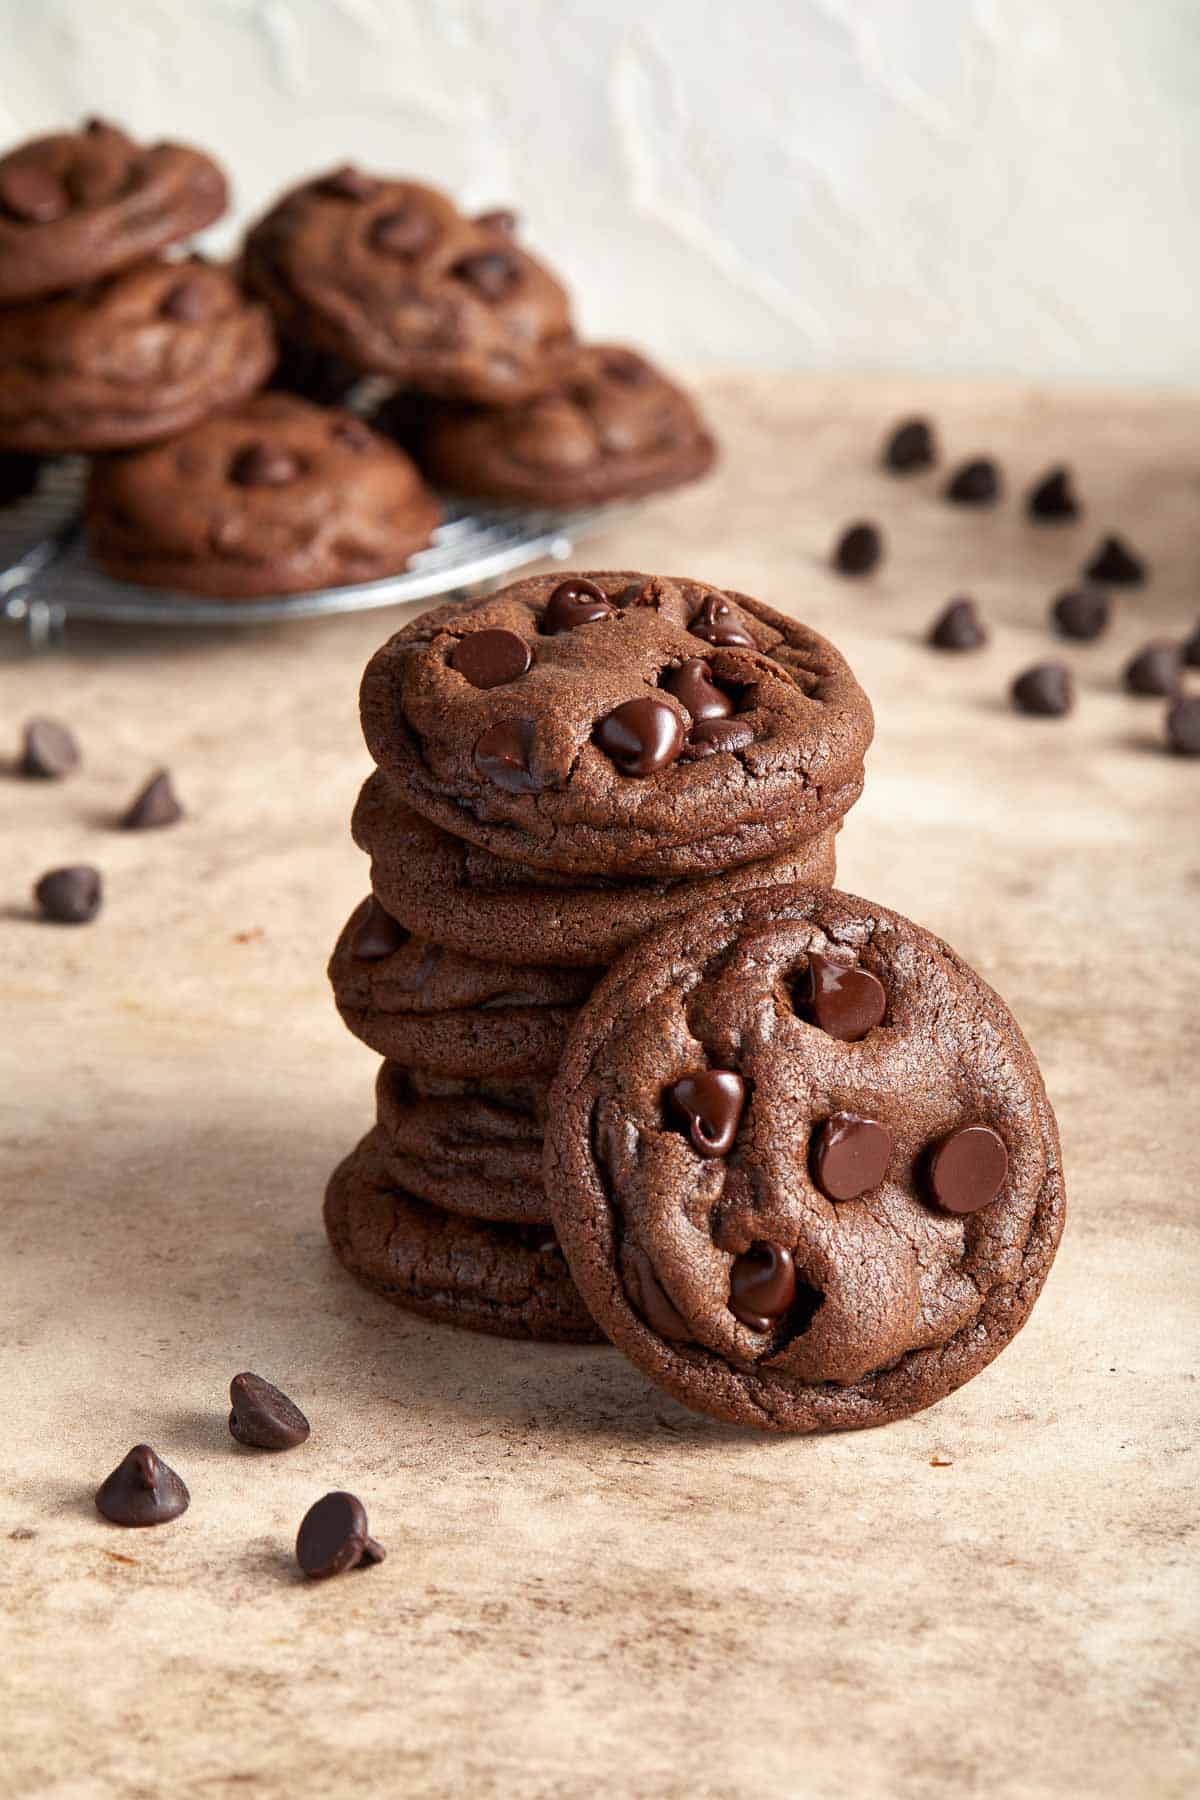 Double Chocolate Chip Cookies are soft and chewy, easy to make, and so satisfying. Enjoy these cookies in under 20 minutes with no chilling required! | aheadofthyme.com